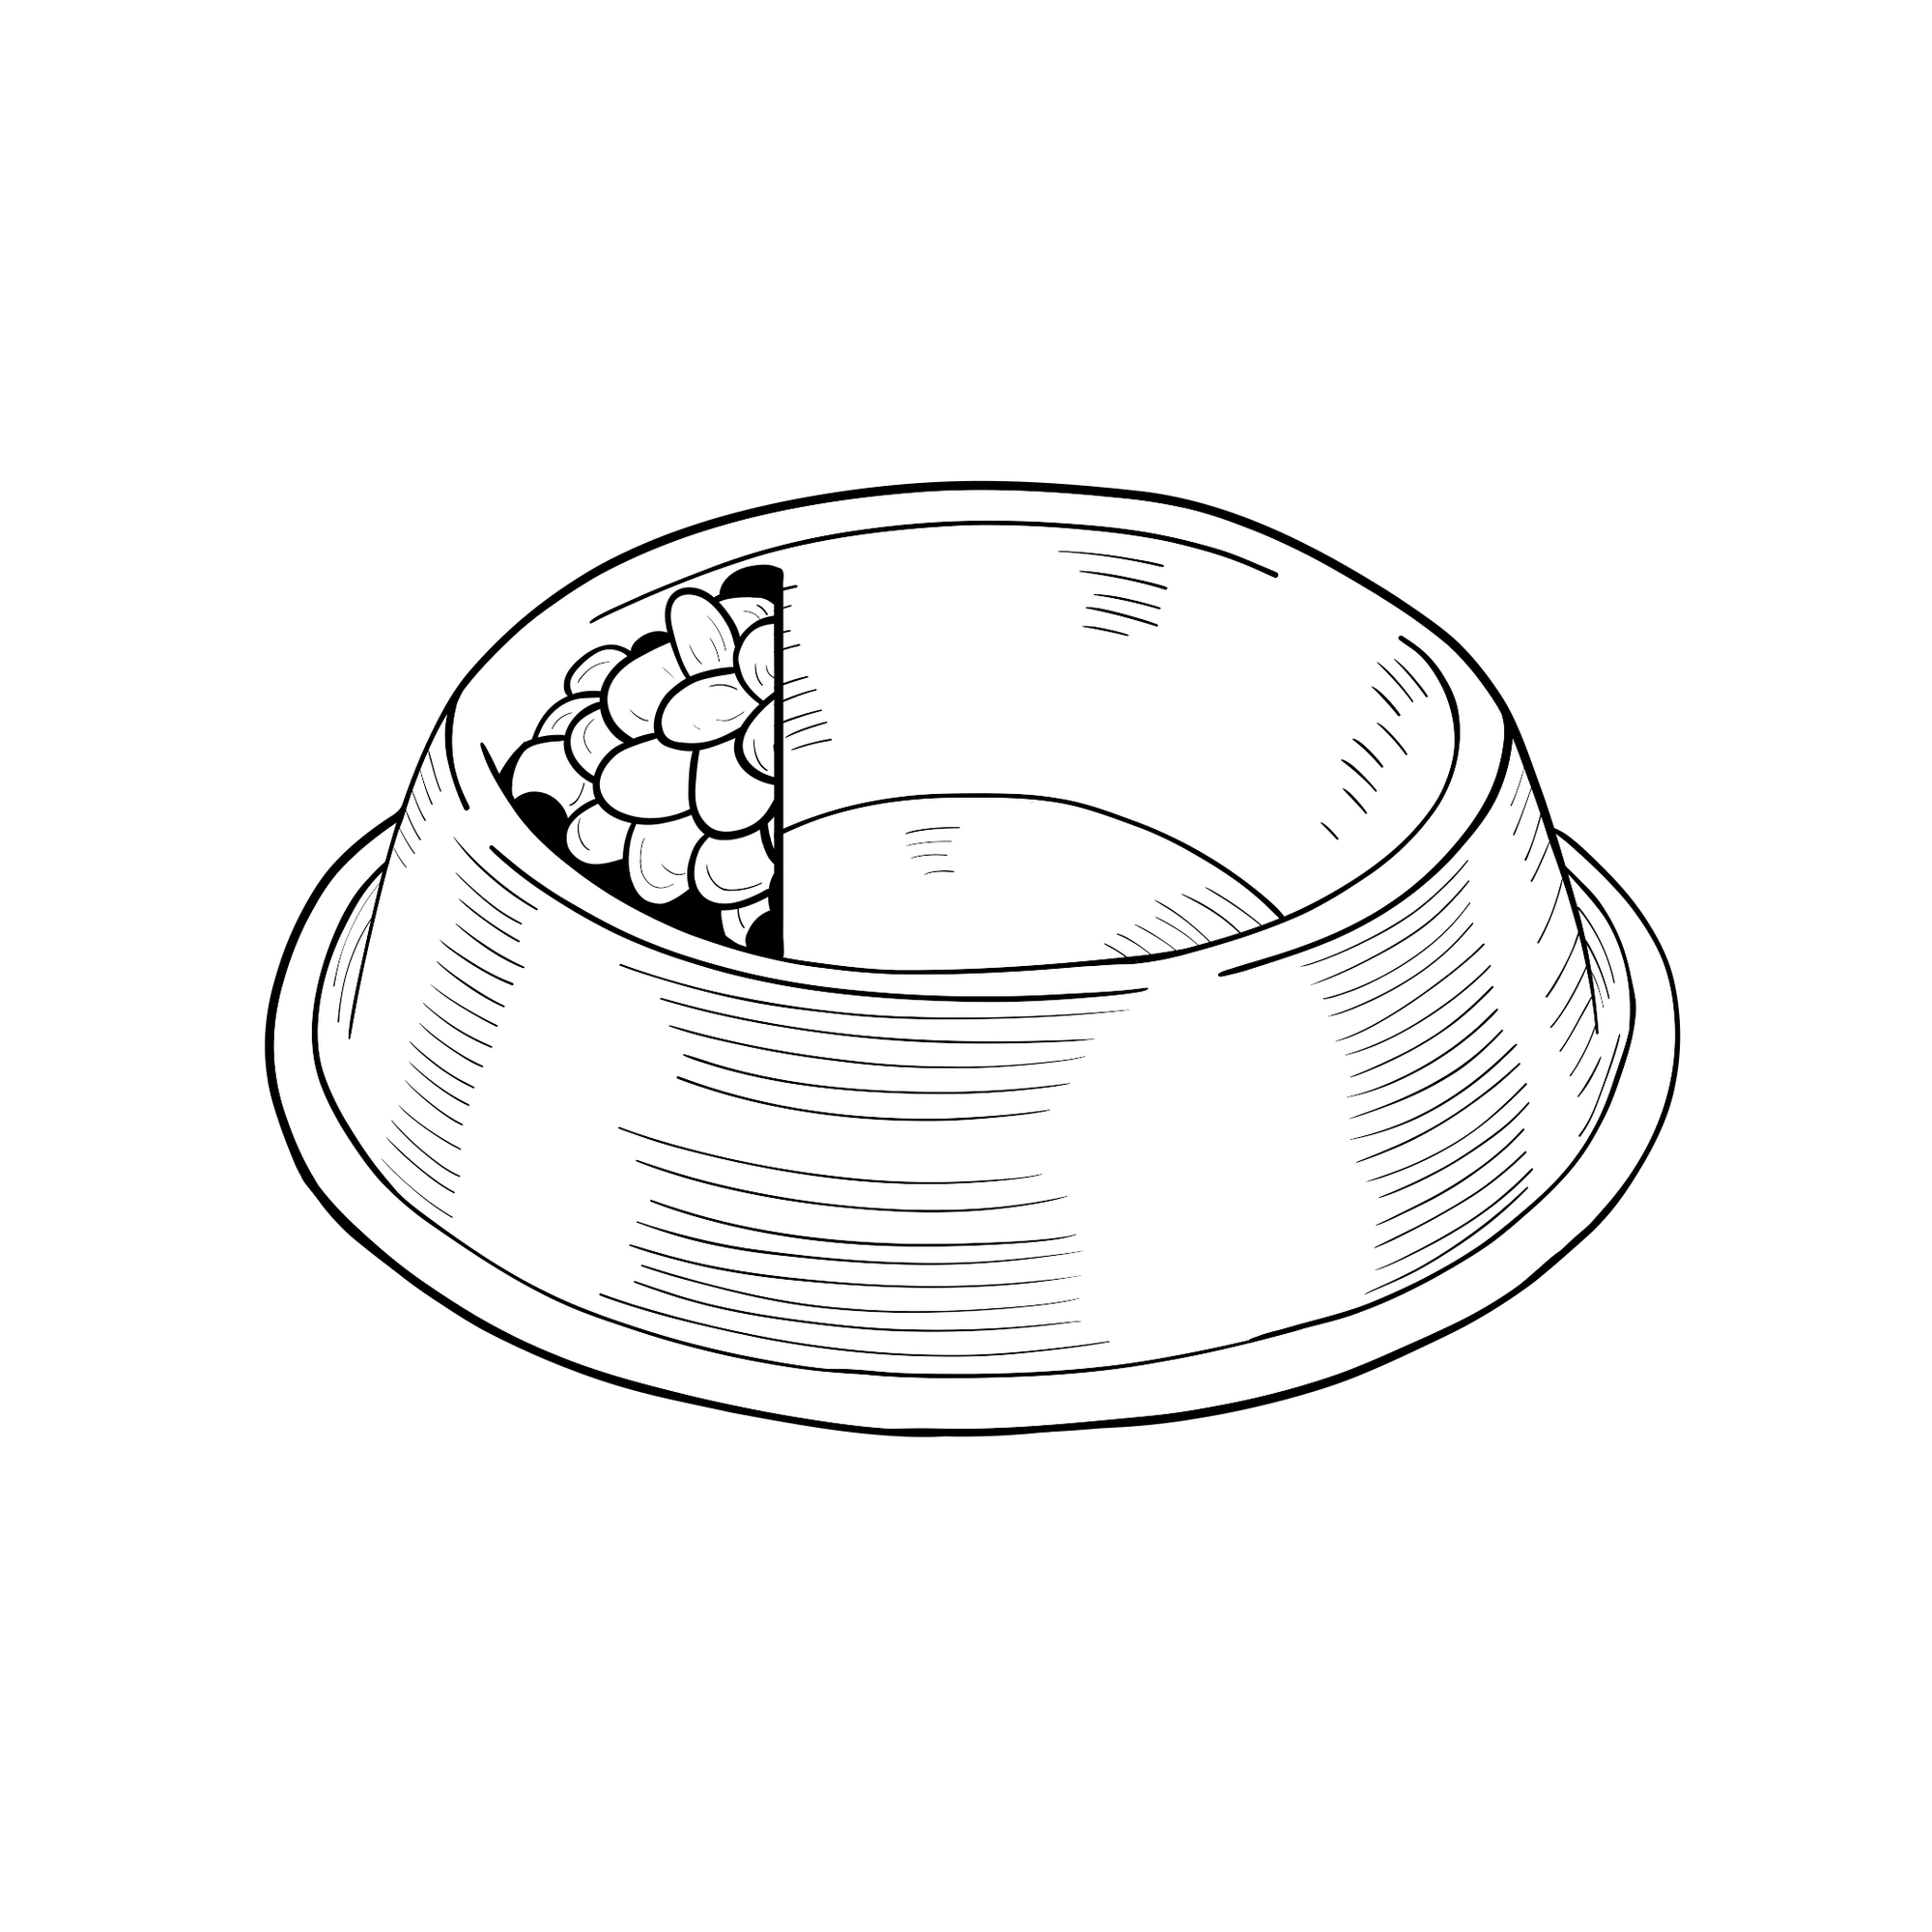 Line drawing of a bowl of food, filled 1/4 of the way with kibble.